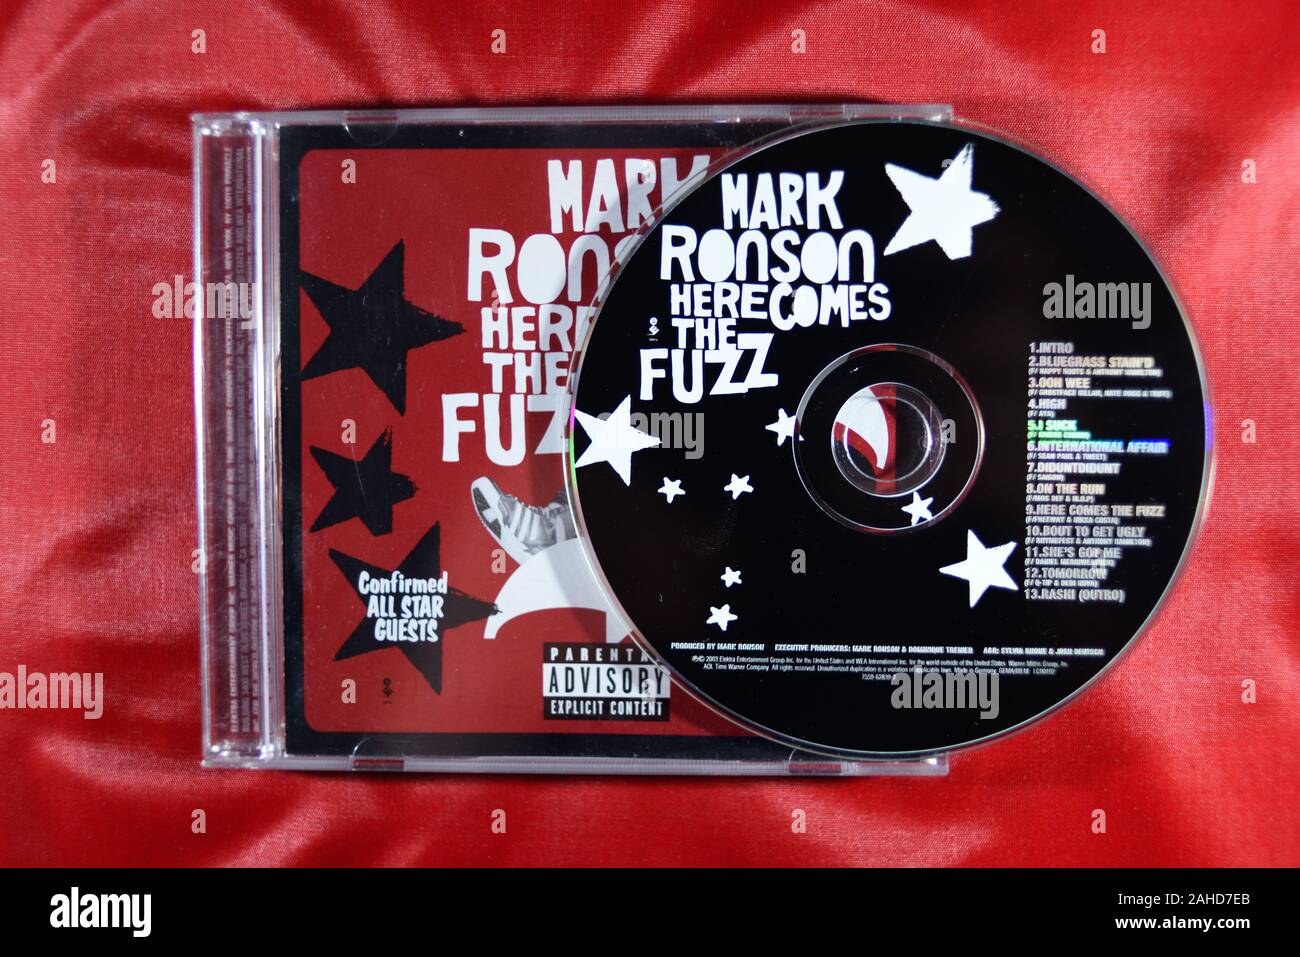 Music CD'S, Mark Ronson Here comes the Fuzz. Stock Photo